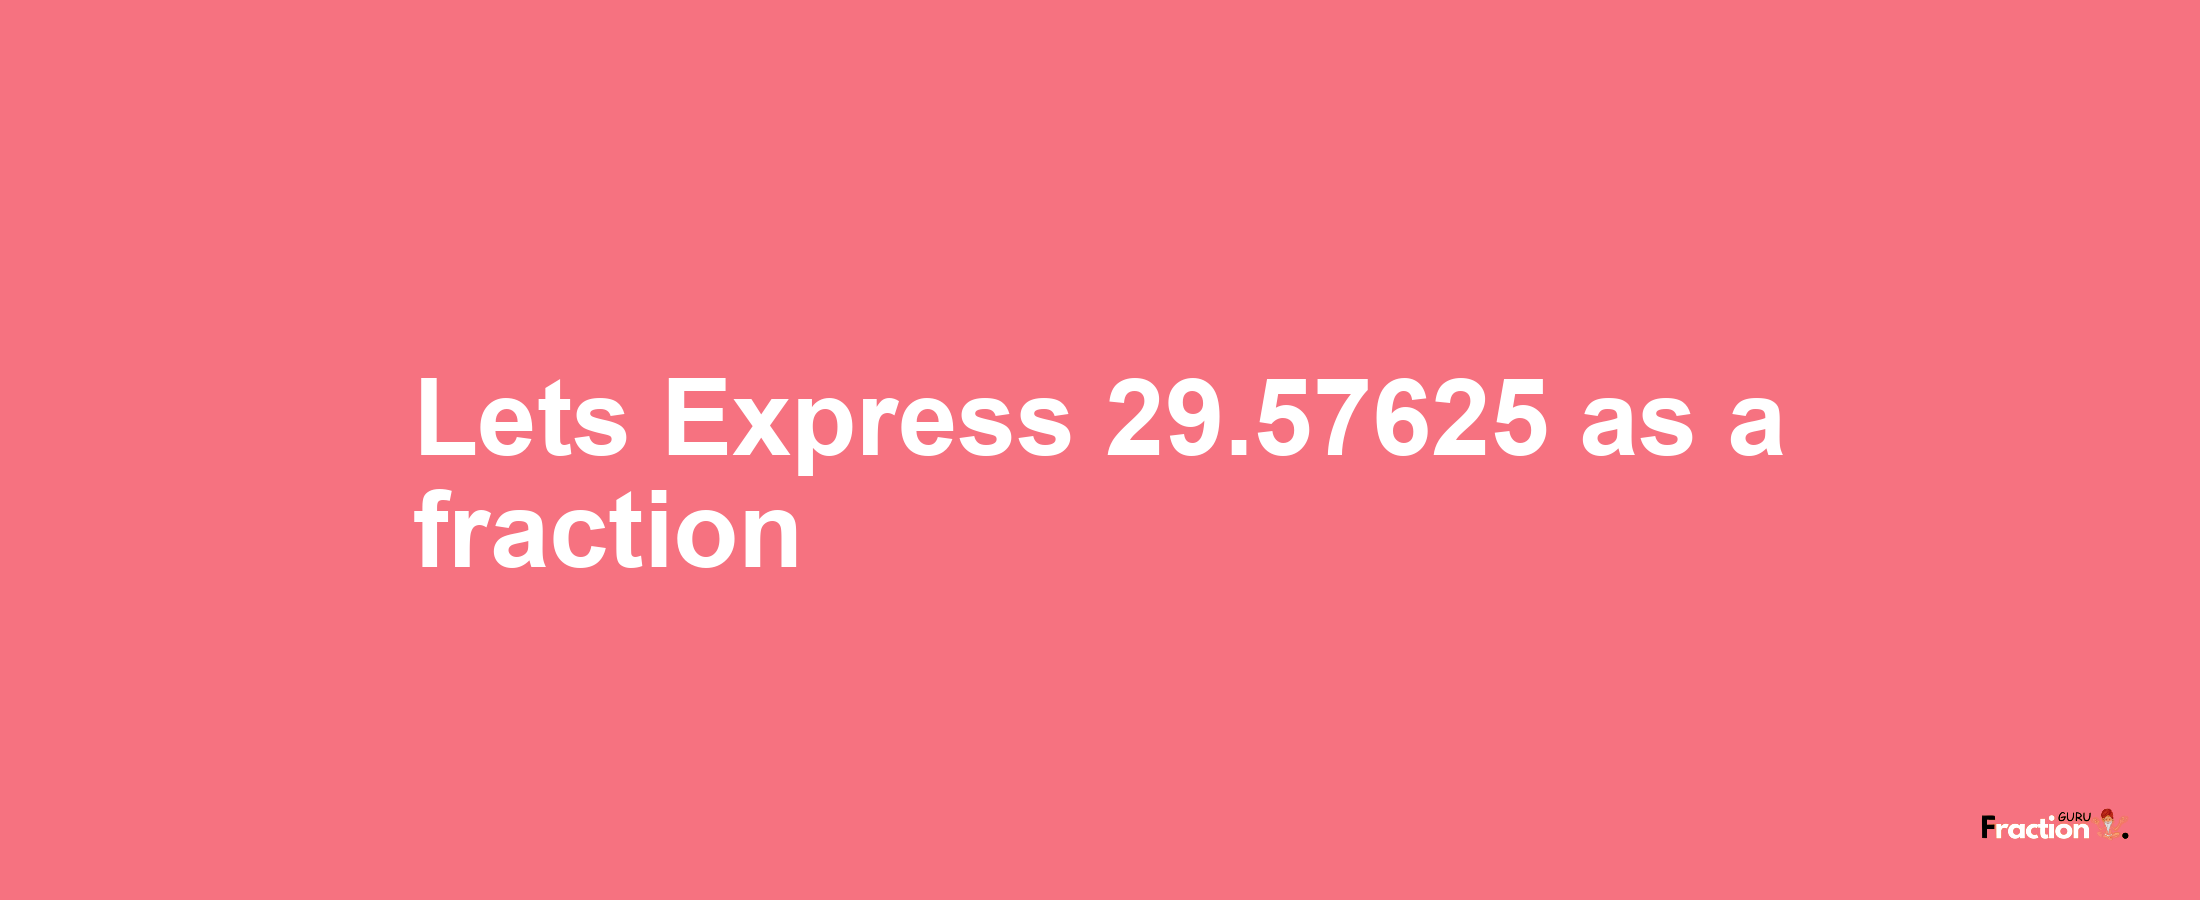 Lets Express 29.57625 as afraction